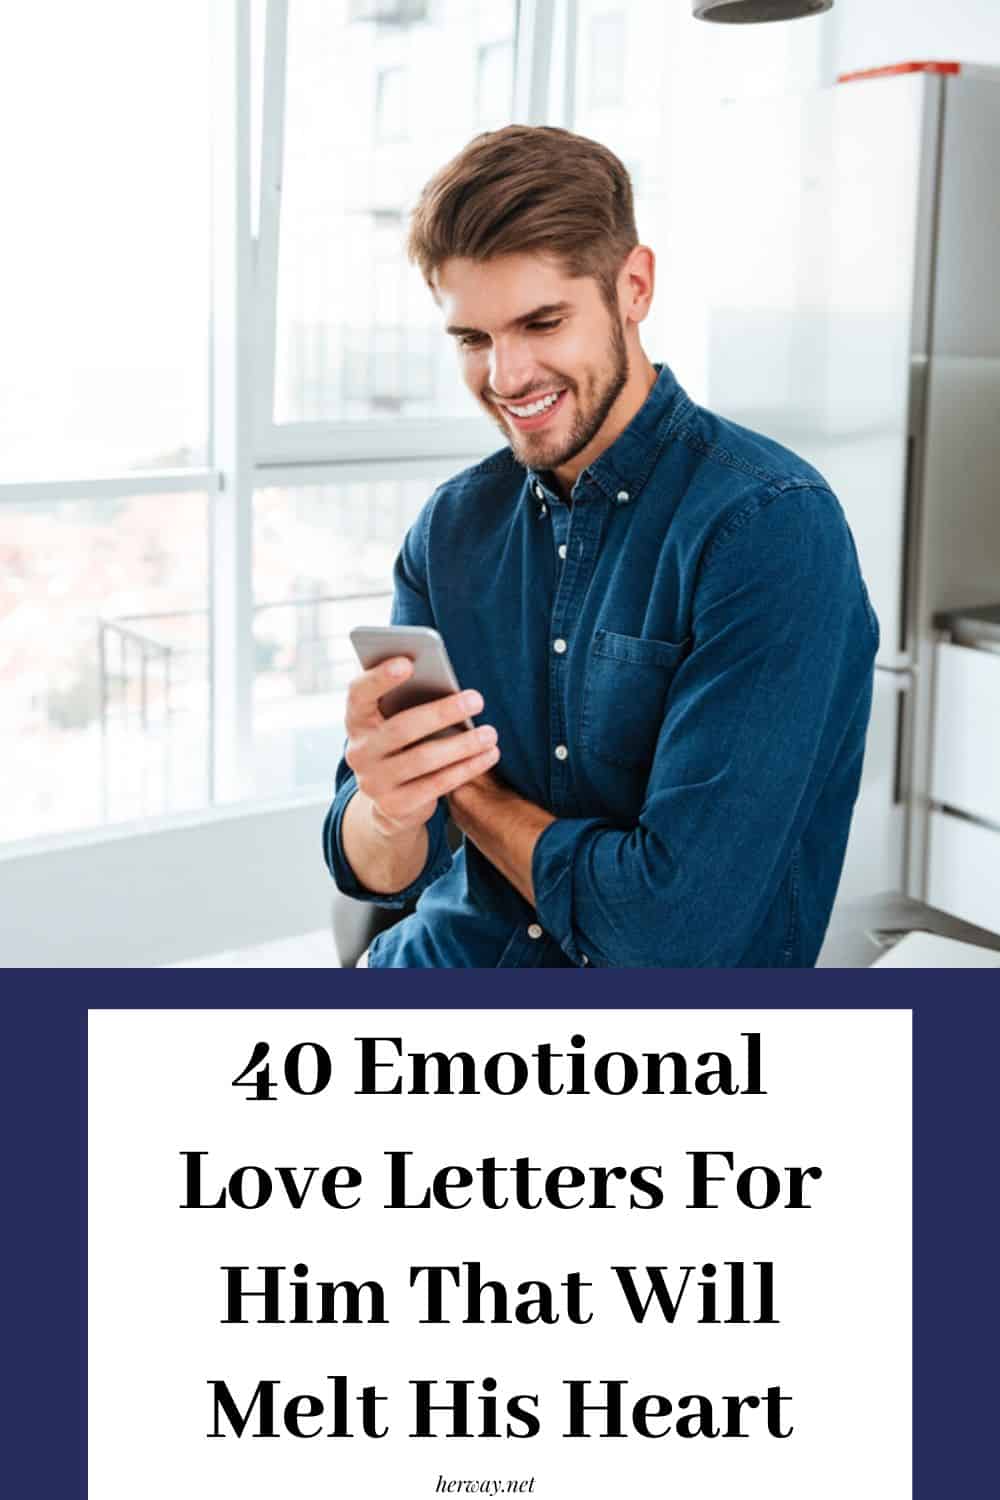 40 Emotional Love Letters For Him That Will Melt His Heart